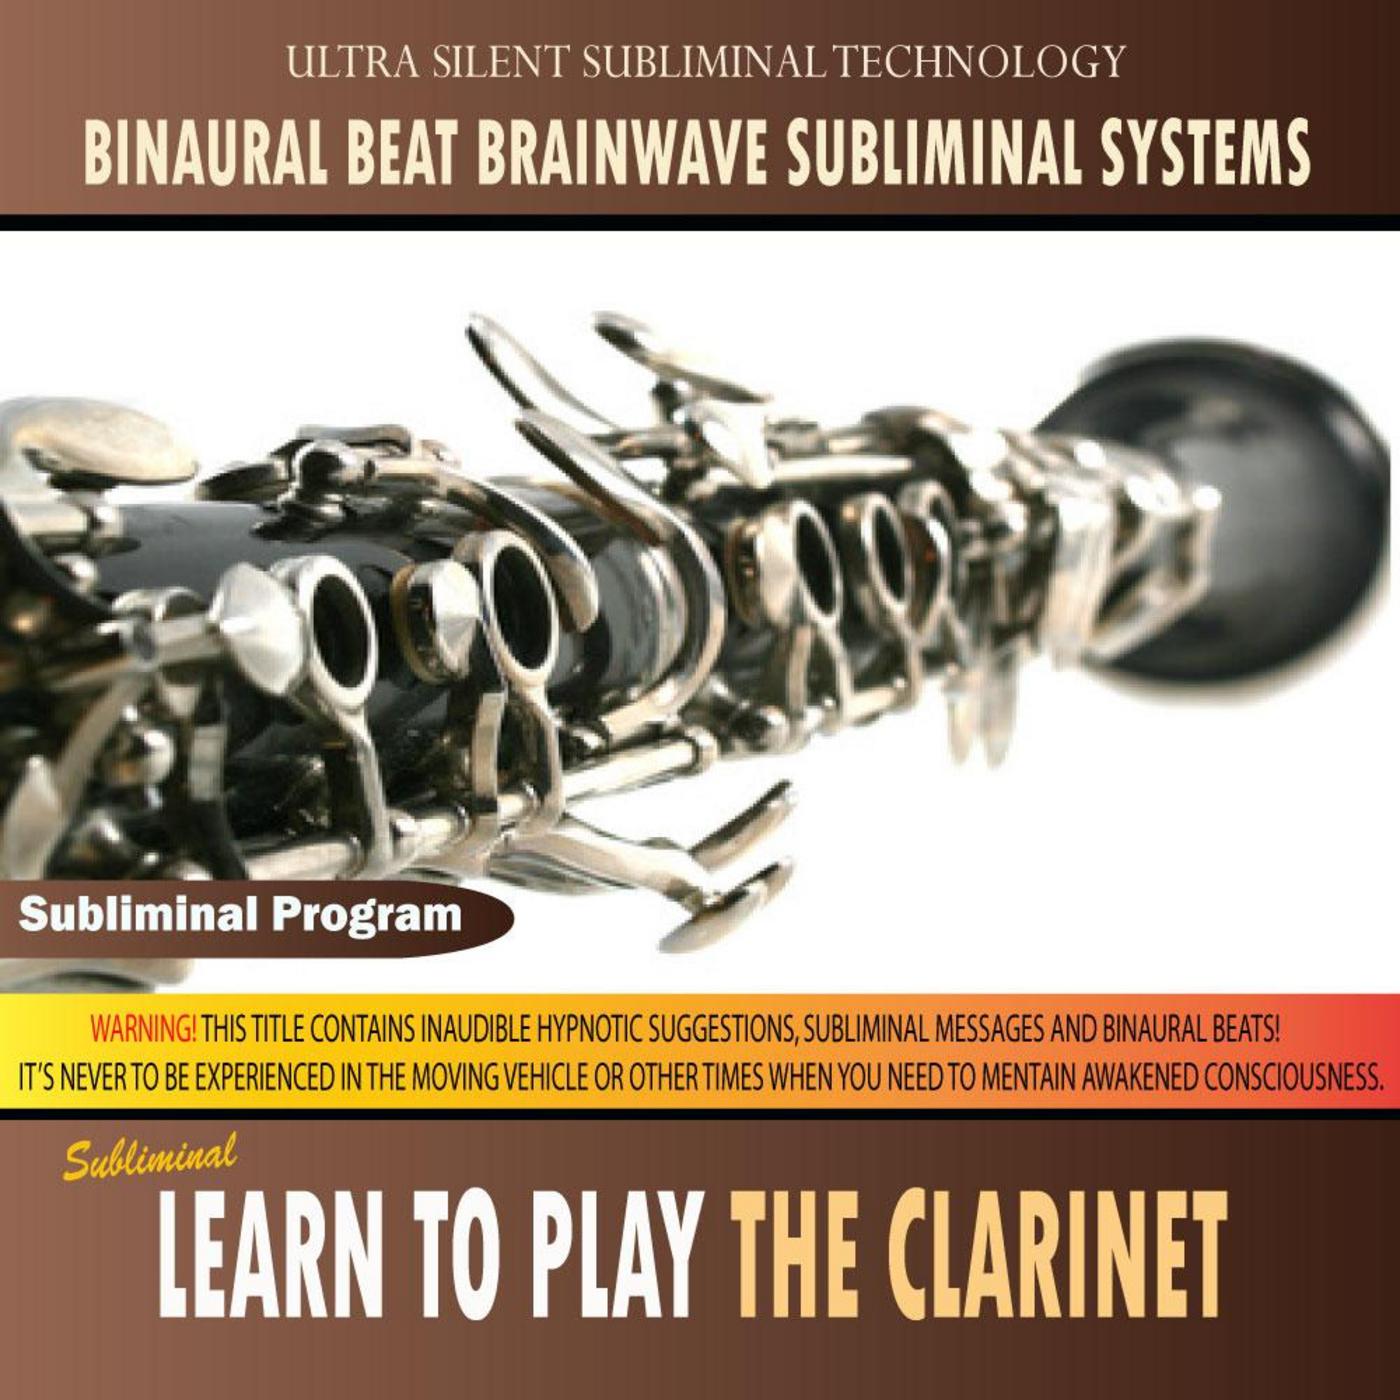 Learn to Play the Clarinet - Binaural Beat Brainwave Subliminal Systems